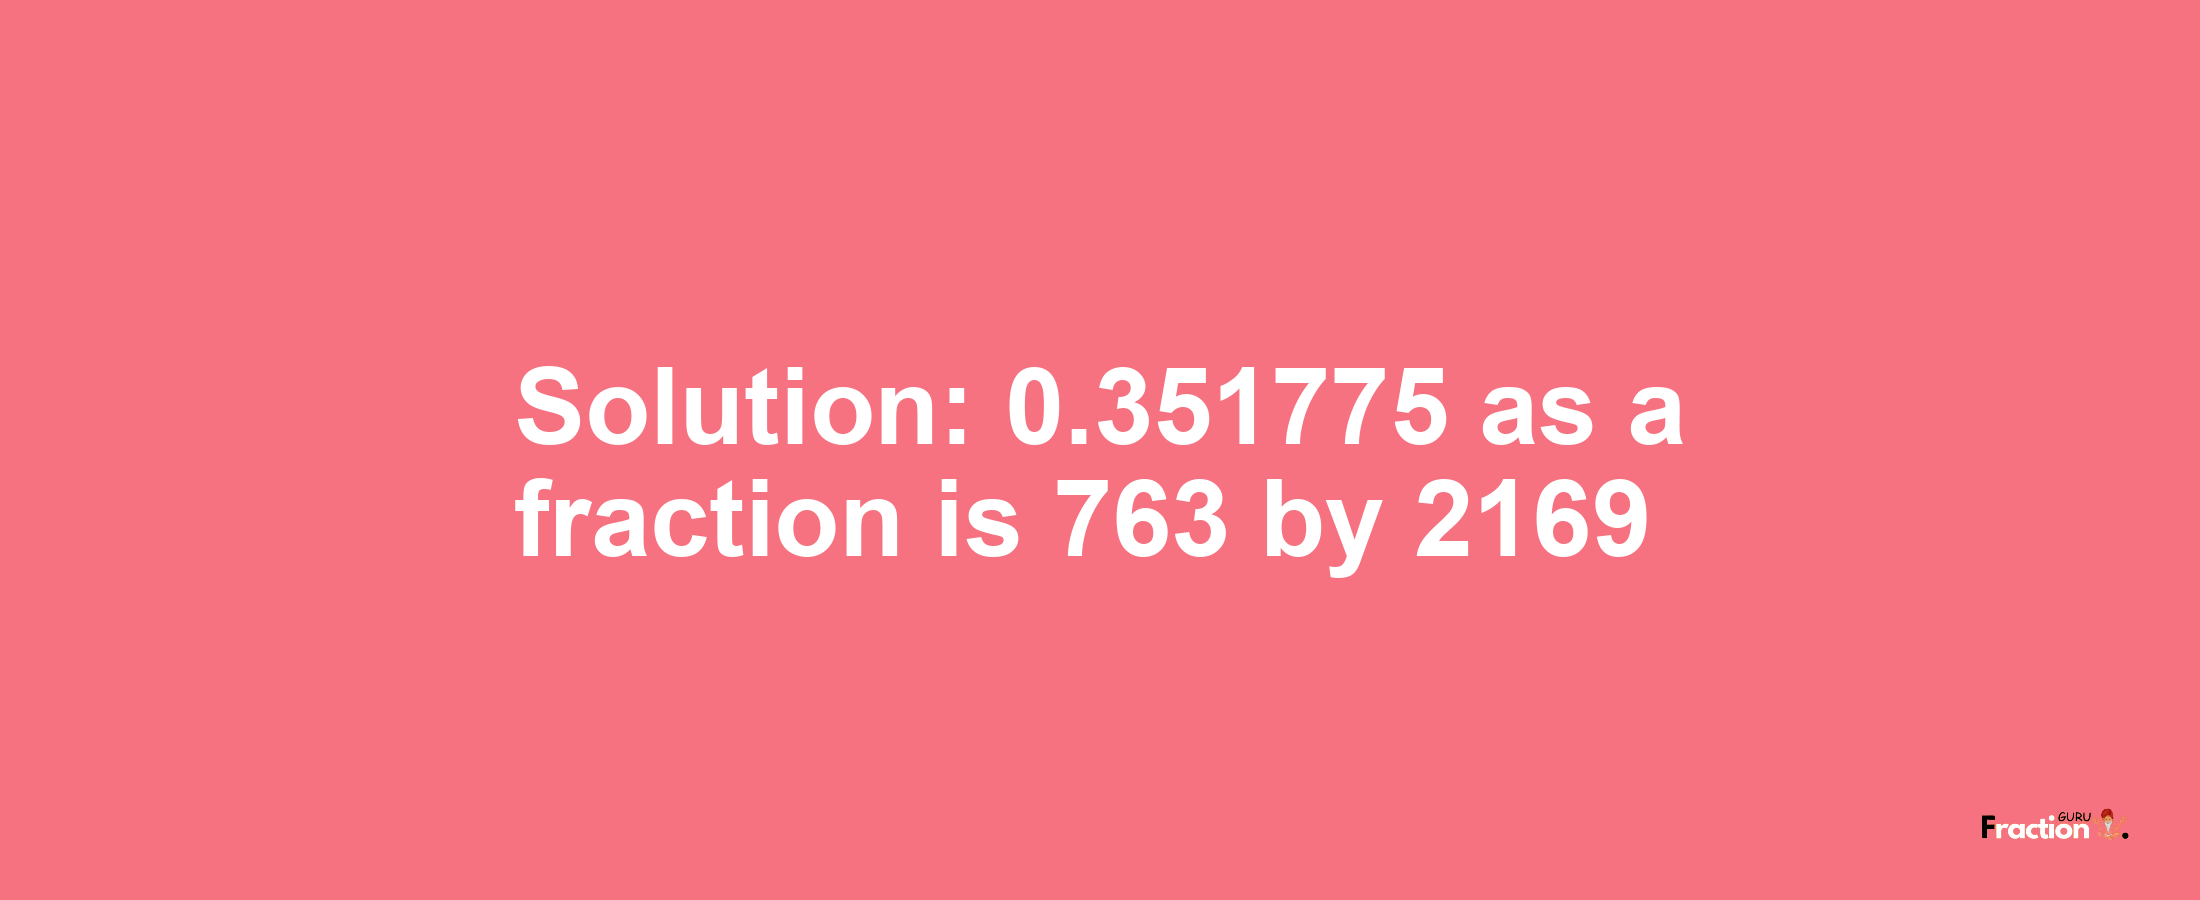 Solution:0.351775 as a fraction is 763/2169